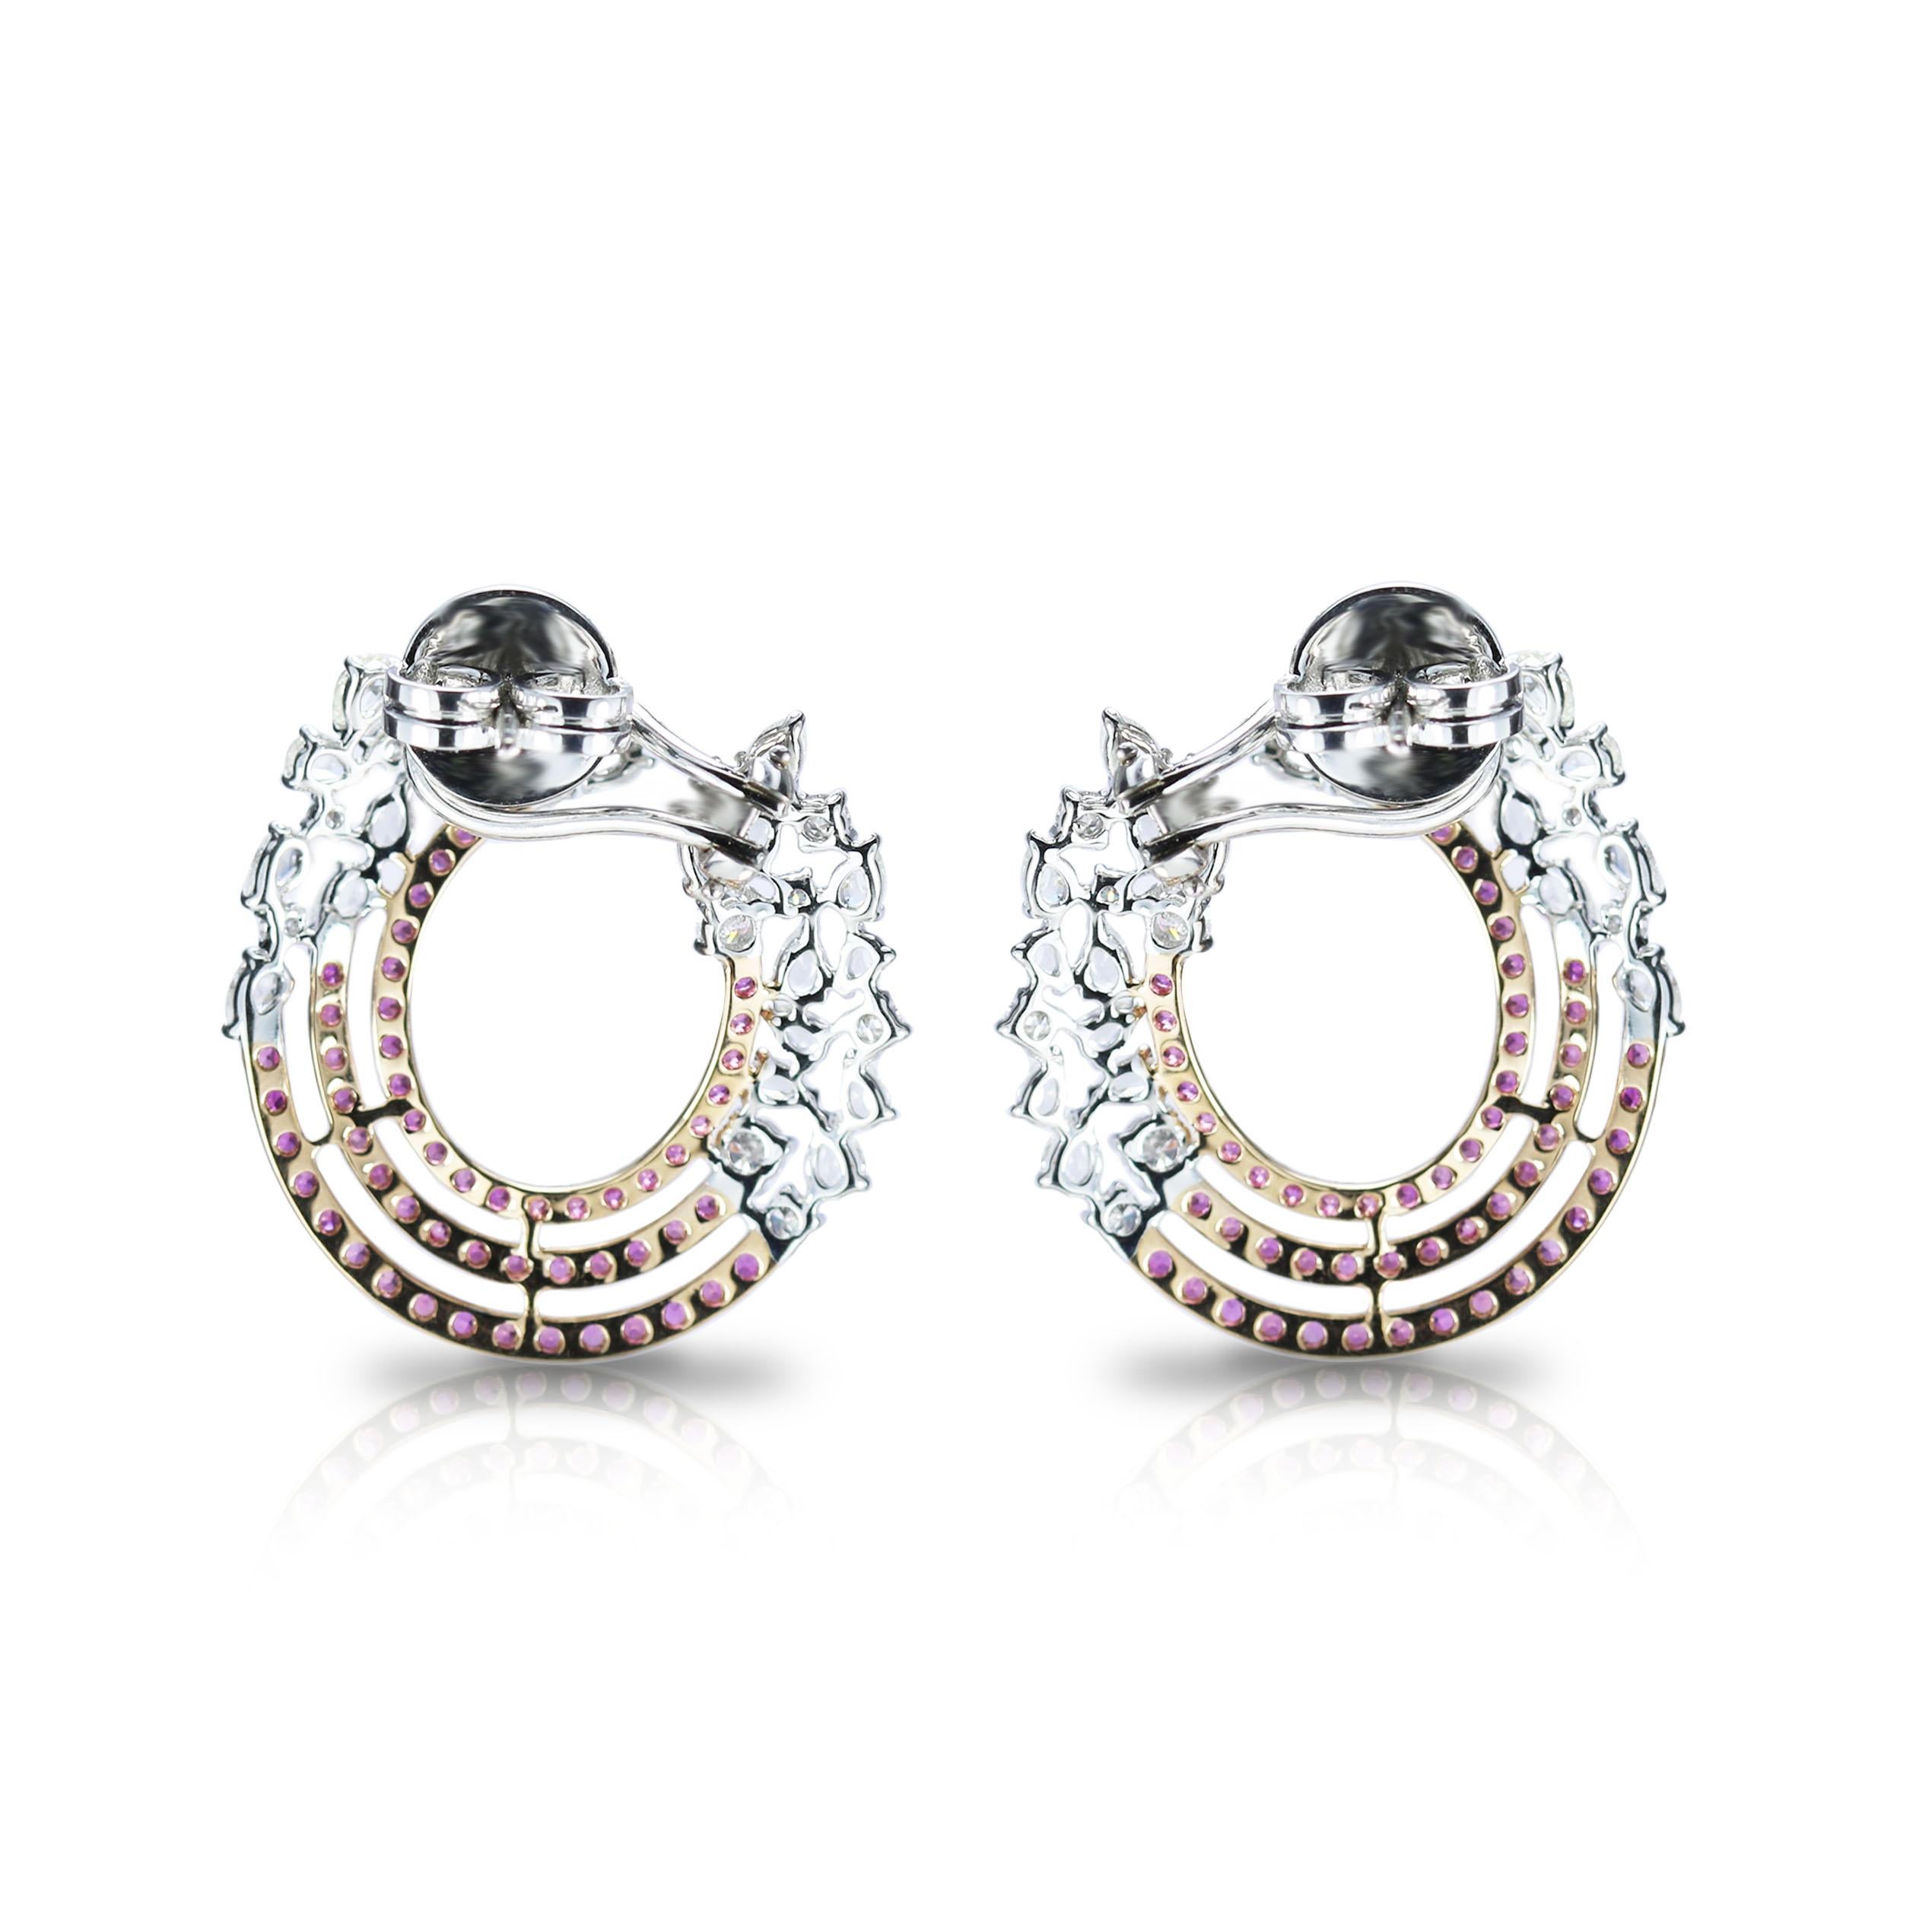 G-H-I-J/ VS-SI White and Pink diamonds, and Pink Sapphire Earrings

Some classic combinations are forever, and this pair exemplifies one such pairing. Marrying pink sapphires with white and brilliant cut pink round and pear rose cut diamonds, it is